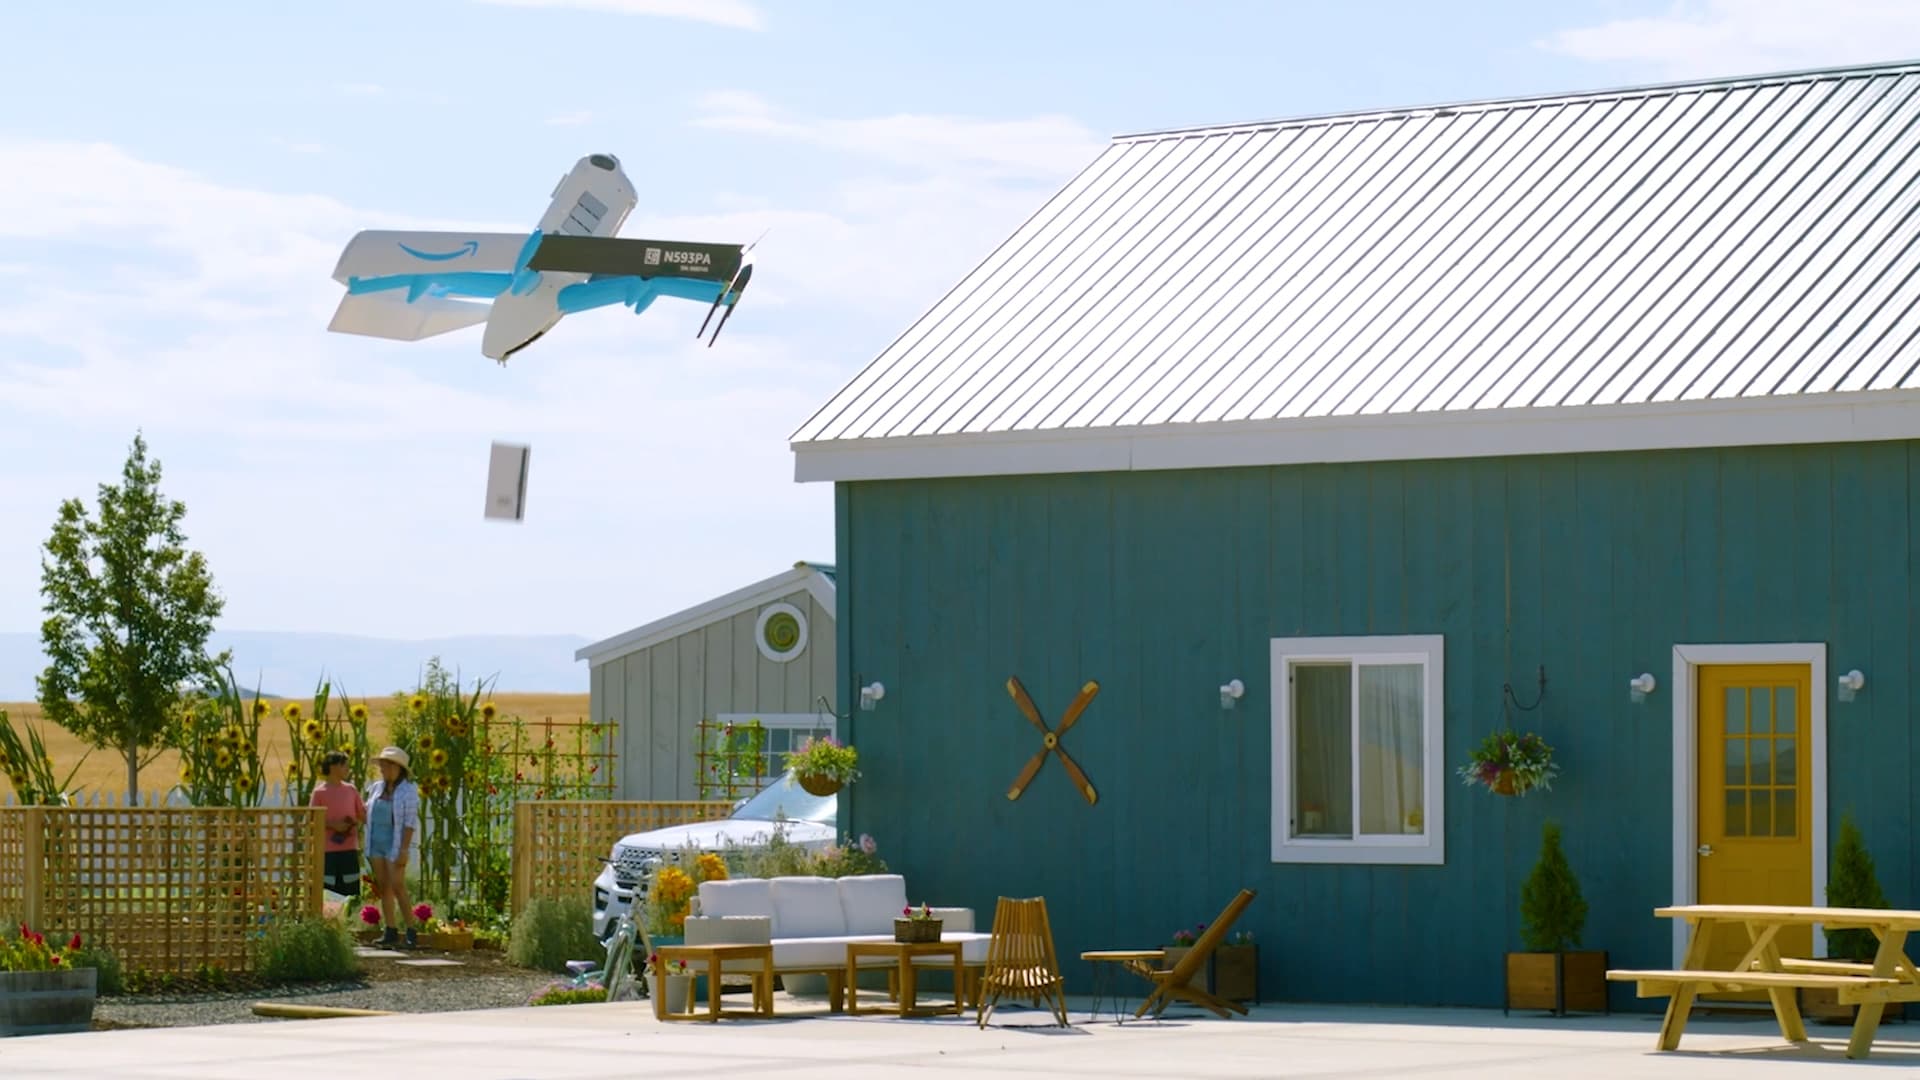 A first look at Amazon's new delivery drone, slated to start deliveries this year